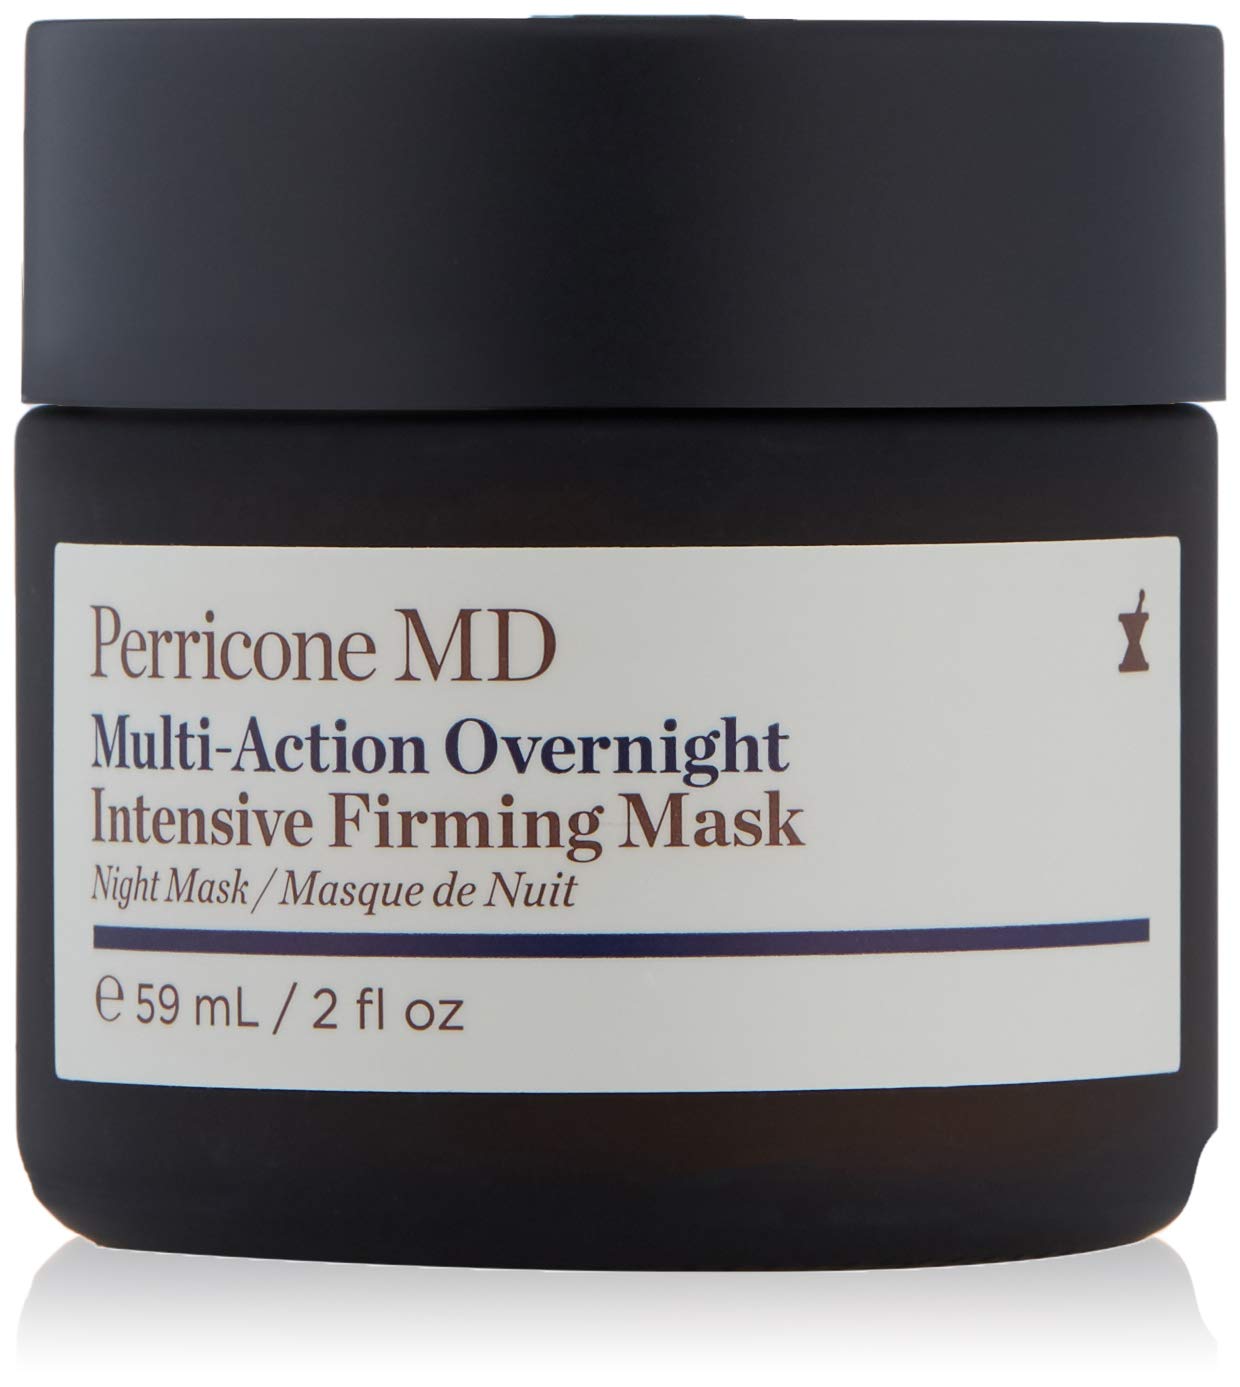 Perricone PERRICONE Multi-Action Overnight Intensive Firming Mask 59 ml